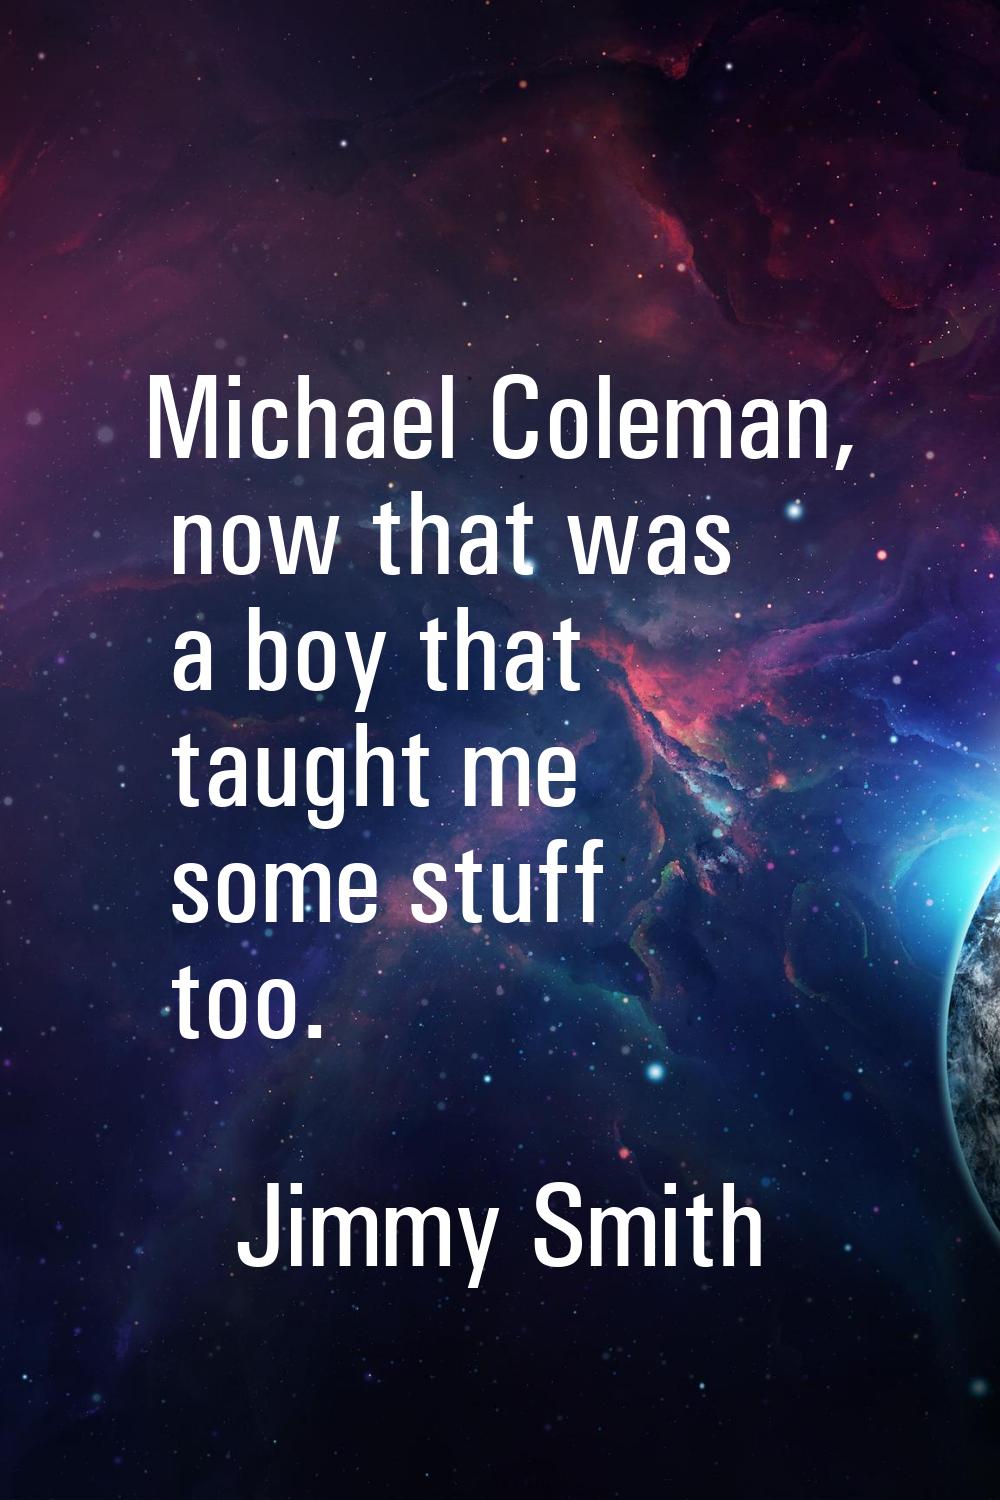 Michael Coleman, now that was a boy that taught me some stuff too.